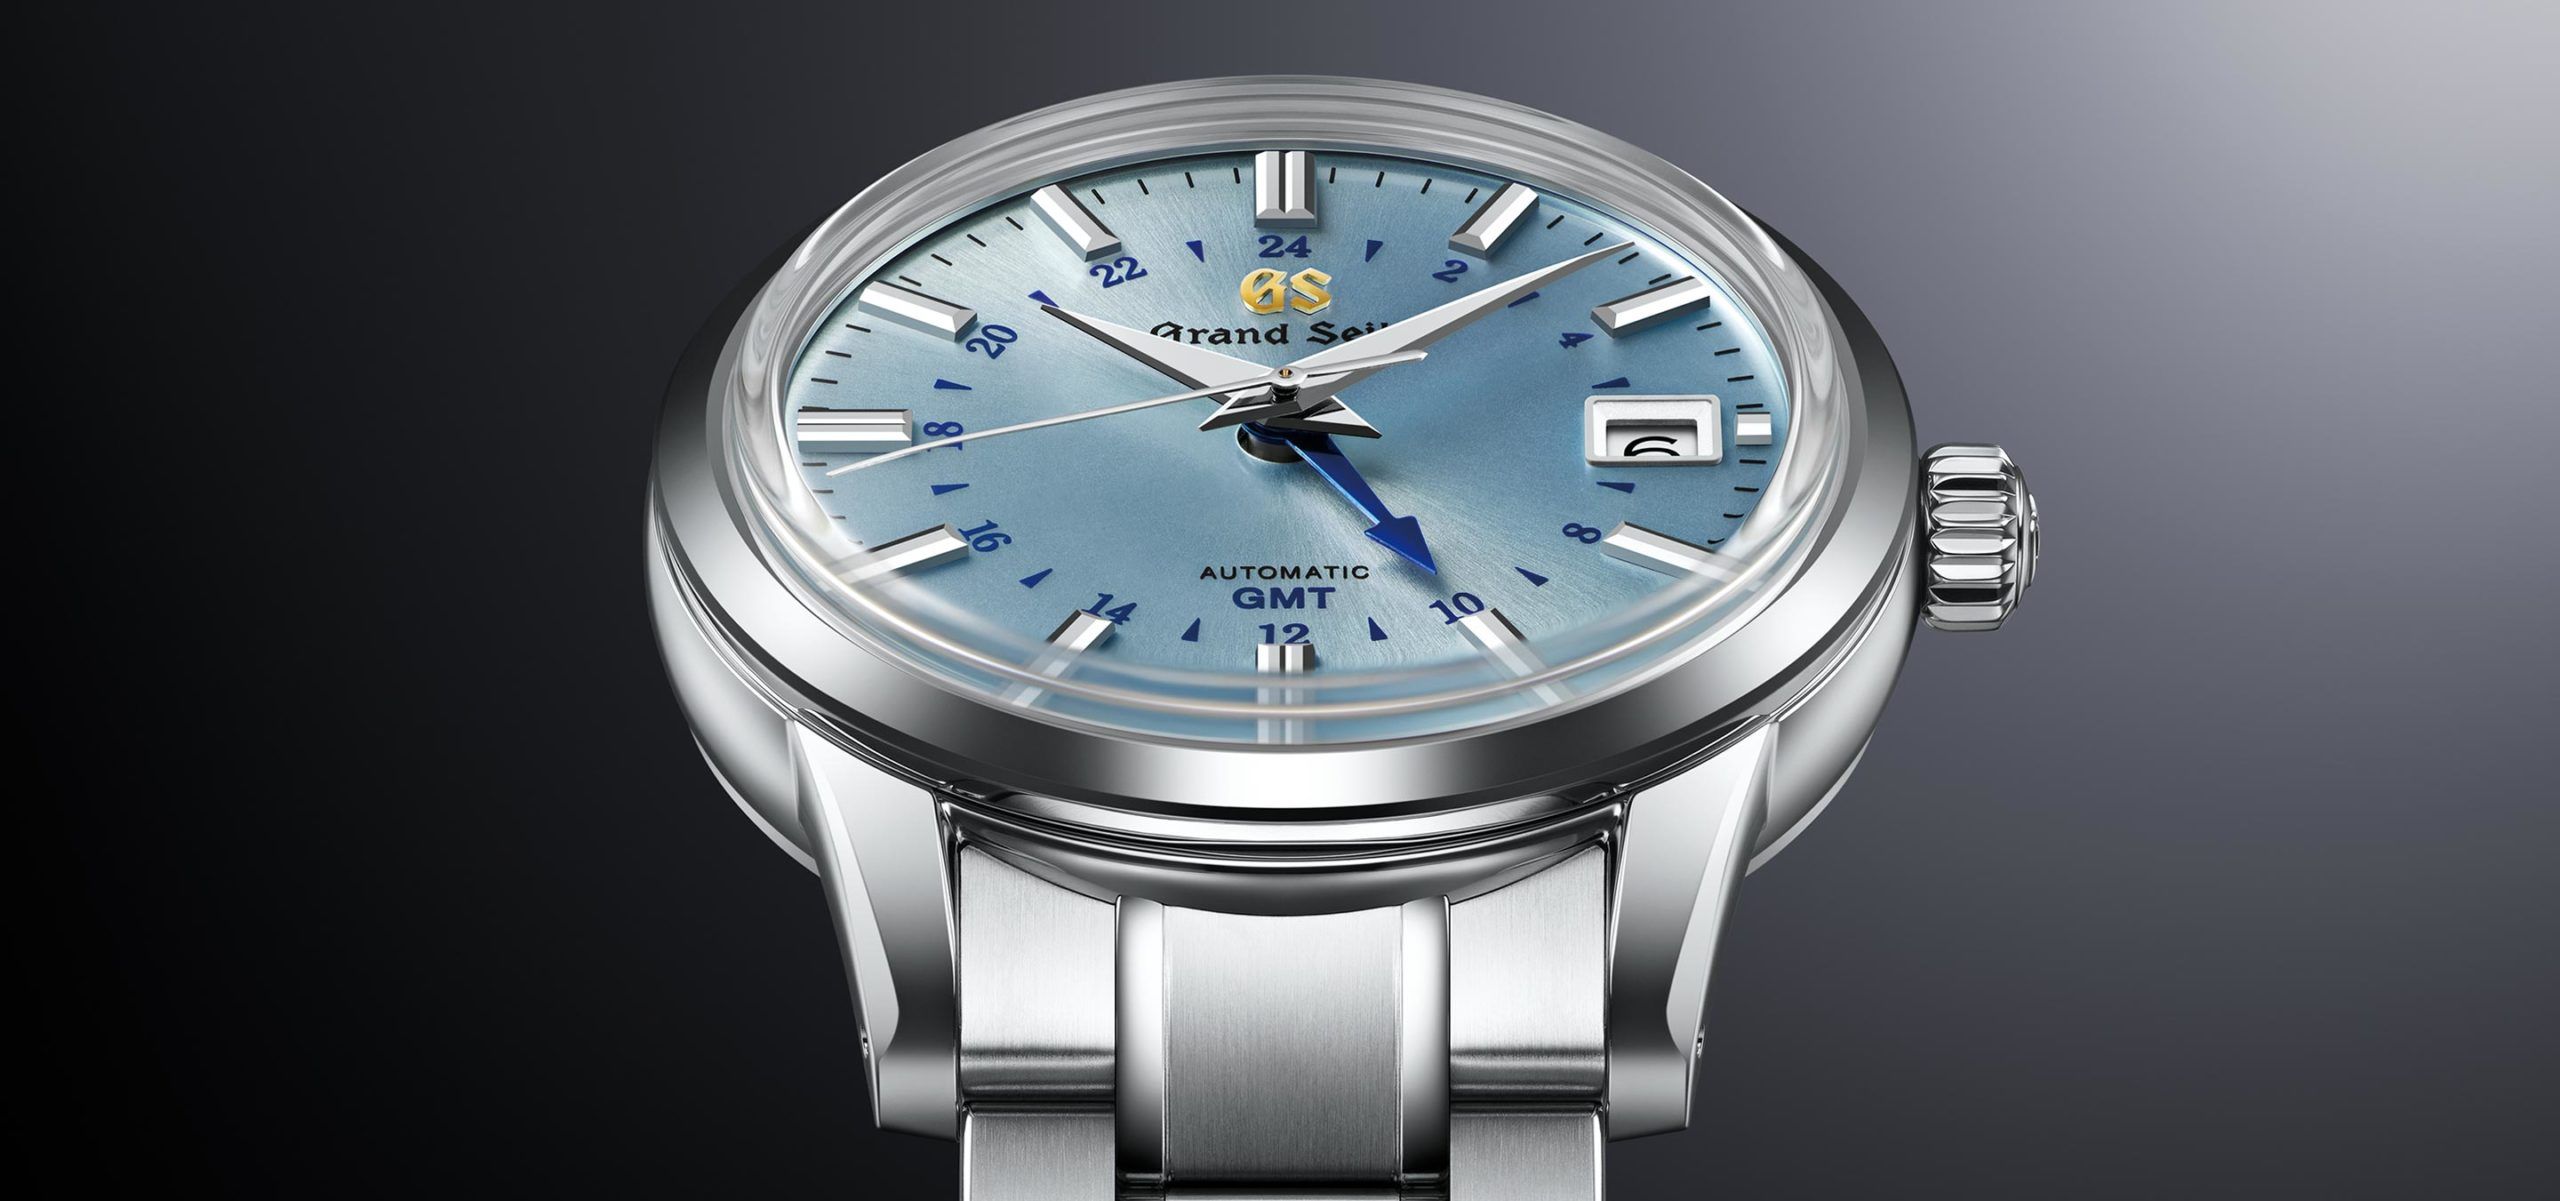 Grand Seiko Launch Two New GMT Watches In Their Sport And Elegance Collections